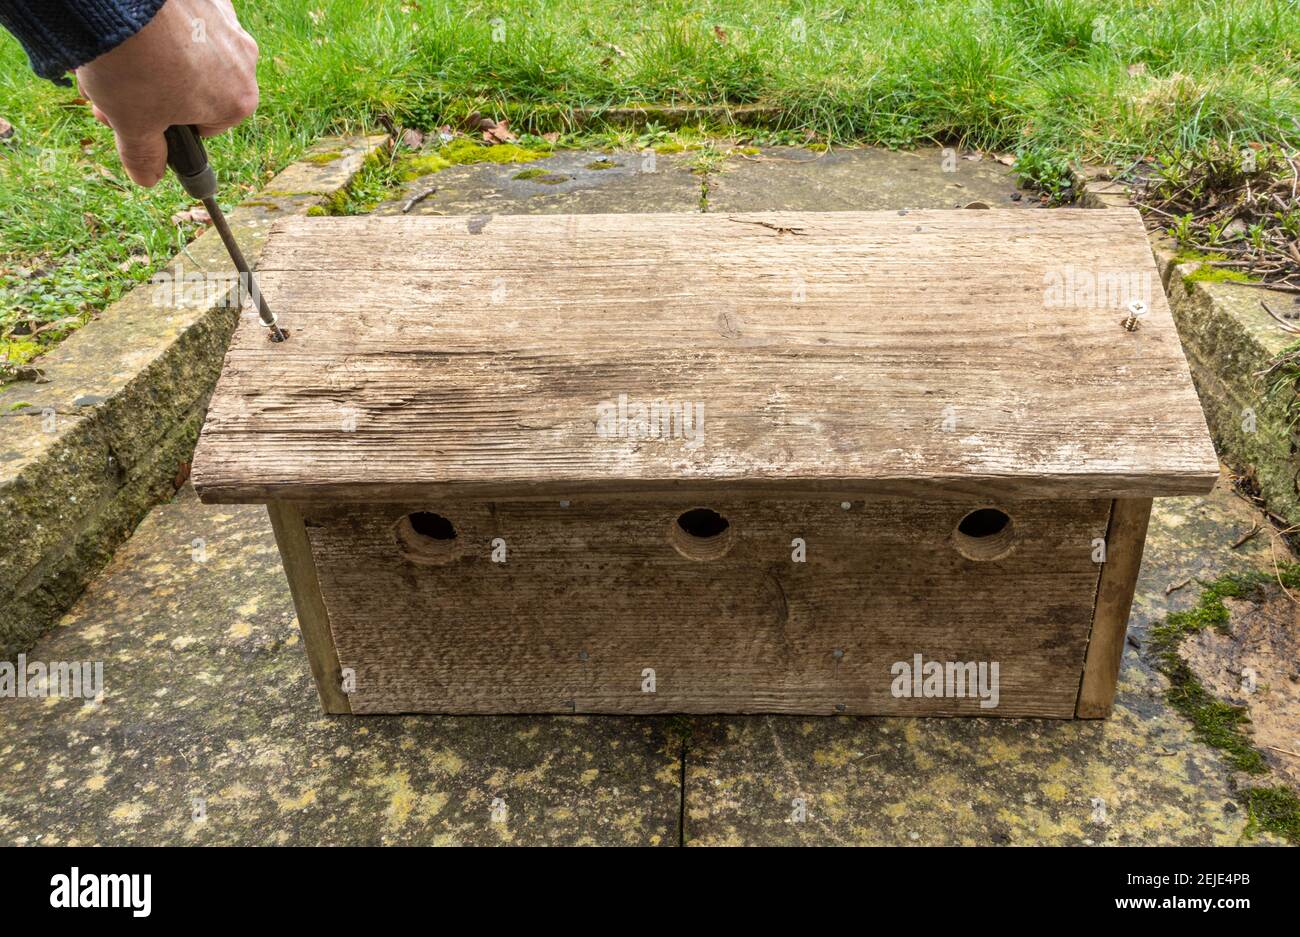 Homemade sparrow box, bird nesting box for sparrows with three chambers and holes, screwing the roof onto the wooden box, UK Stock Photo